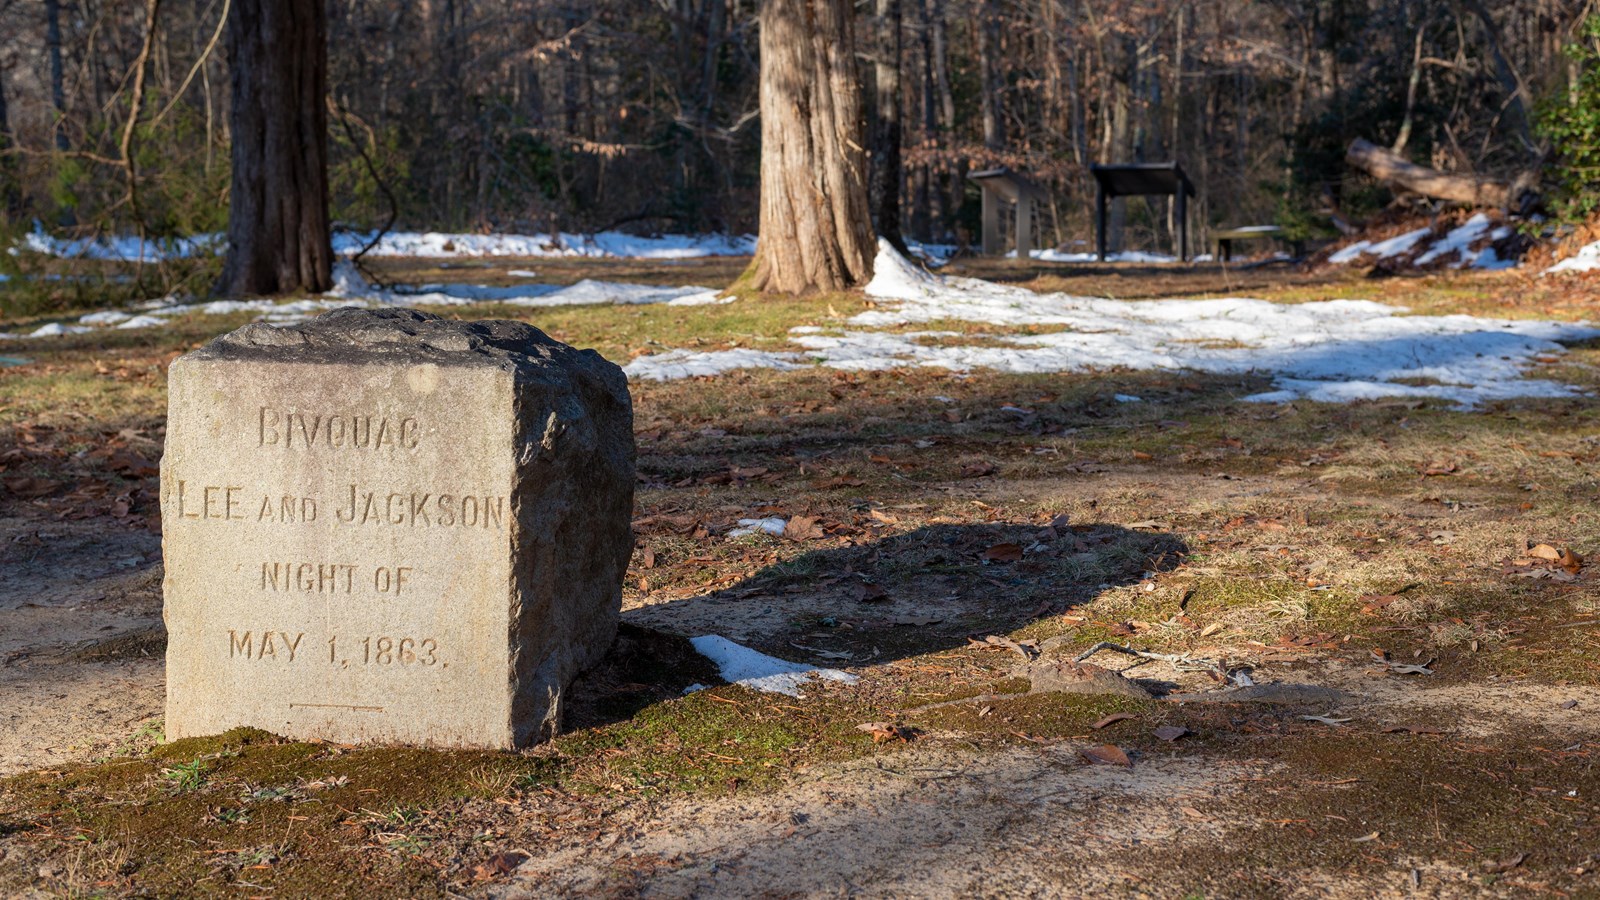 A foot-tall rectangular stone marker in front of an open space surrounded by trees.